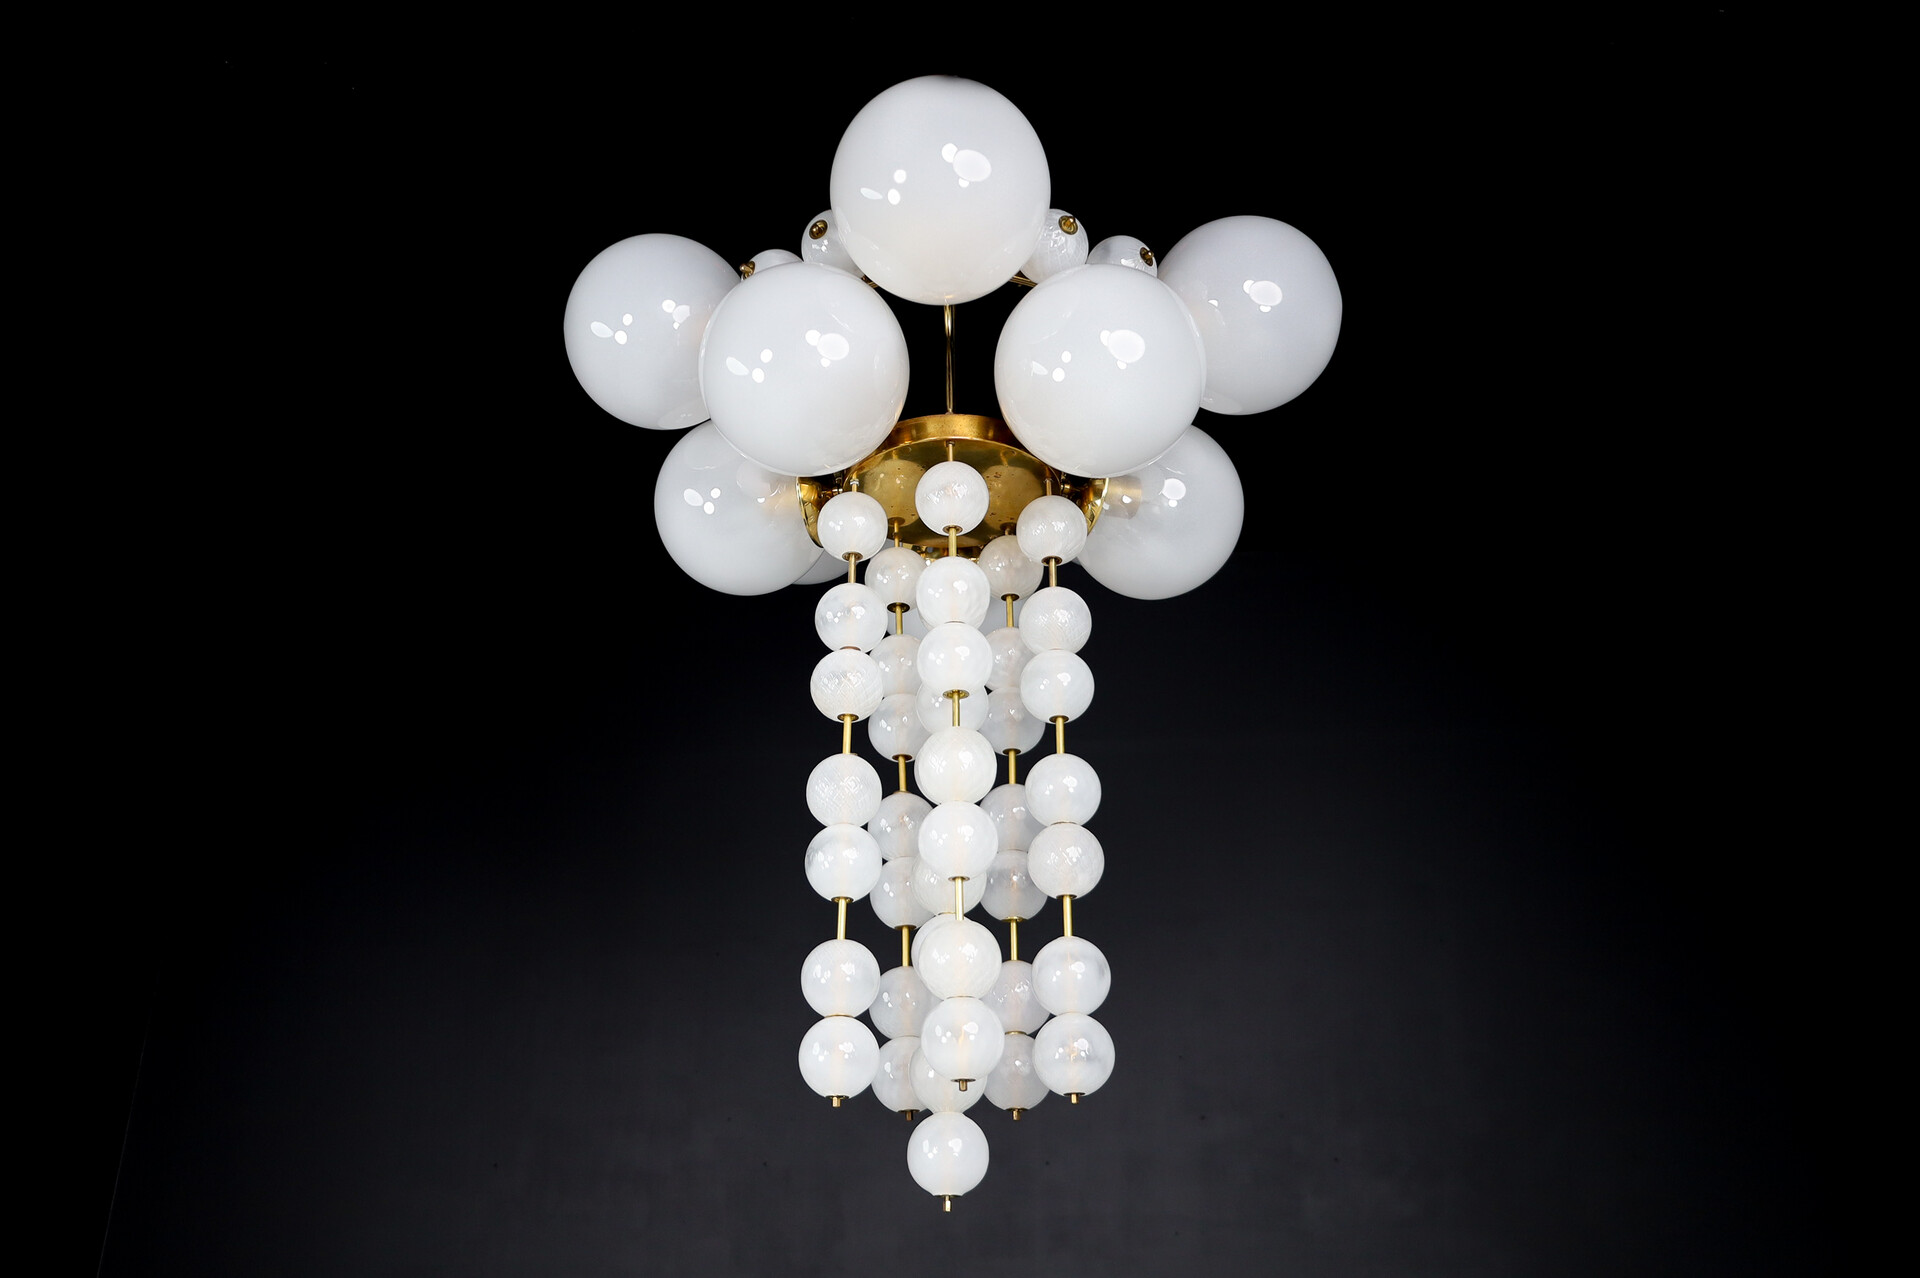 Mid century modern Grand Bohemian Chandeliers With Brass Fixture And Hand-Blowed Frosted Glass Globes, 1960s Mid-20th century